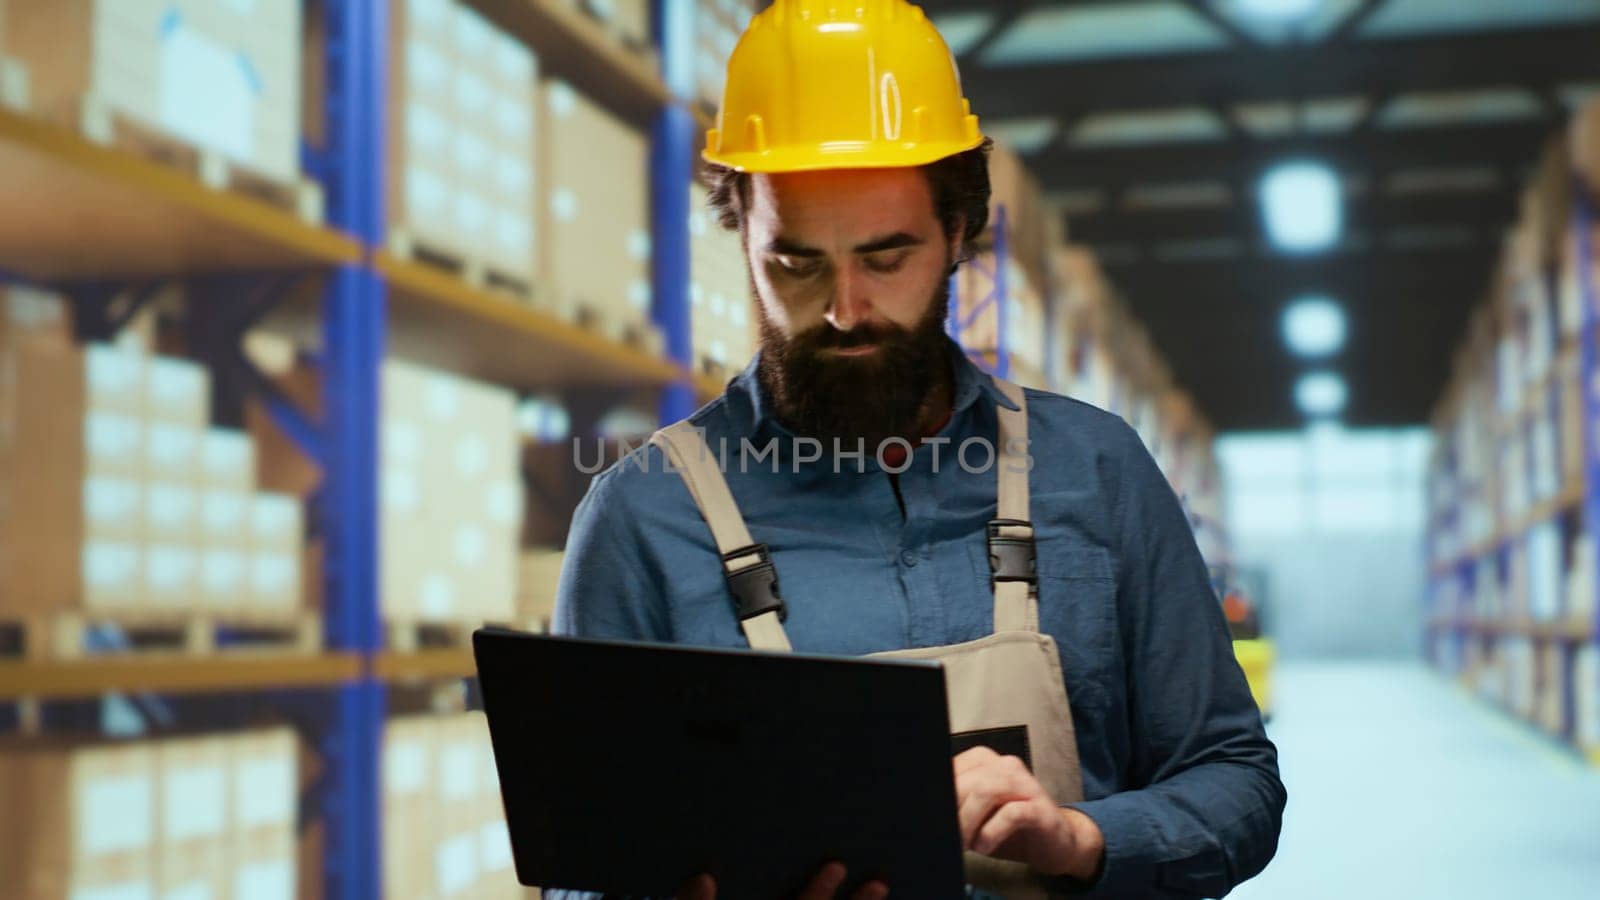 Depot engineer verifying cargo labels and boxes, ensuring shipment and delivery correct details. Warehouse supervisor responsible for staff management and industrial retail activities.